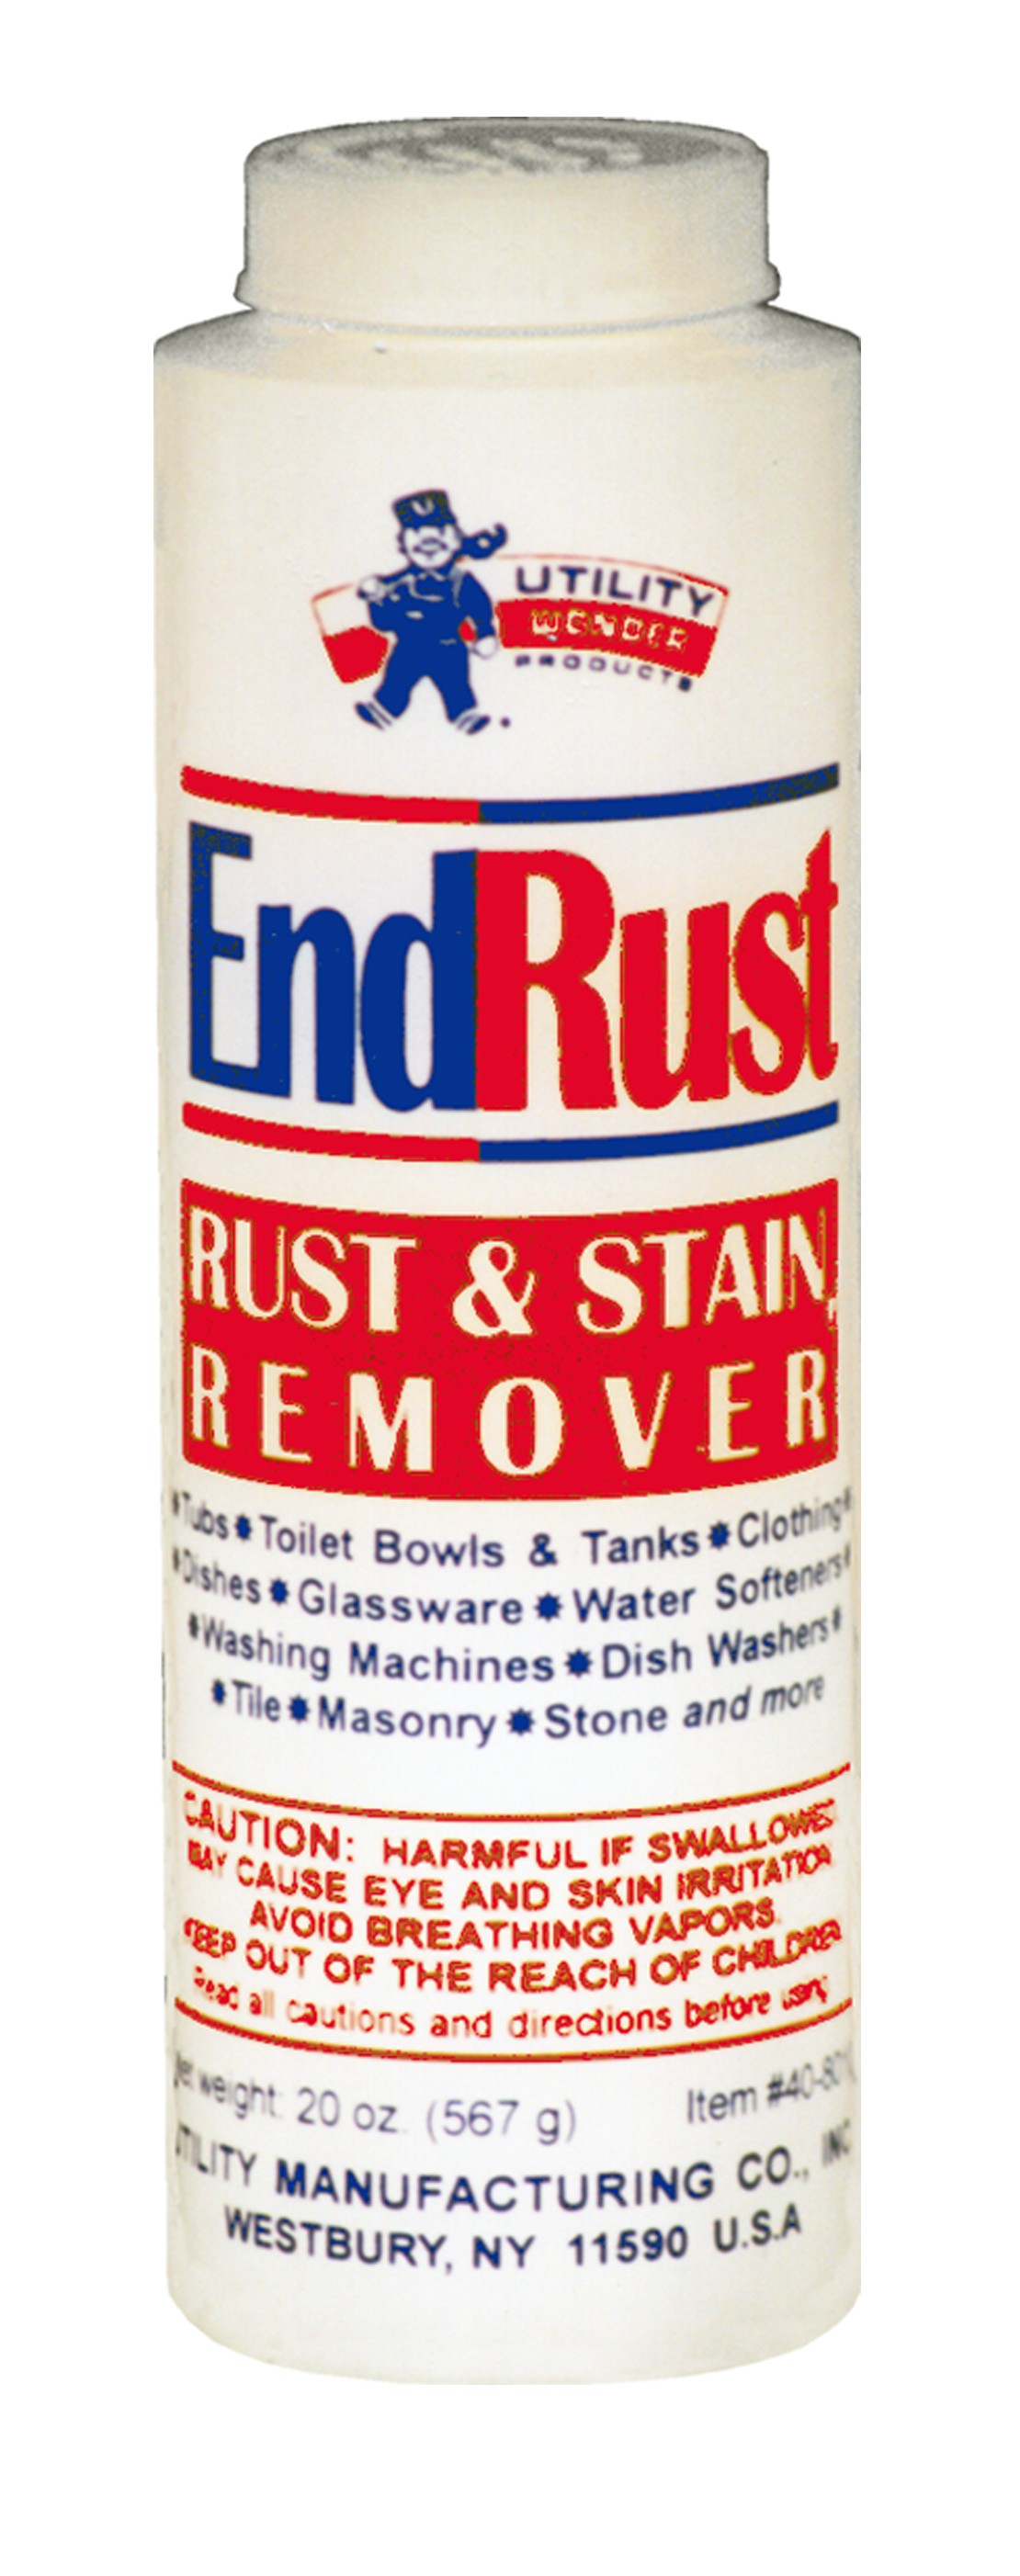 ENDRUST RUST & STAIN REMOVER